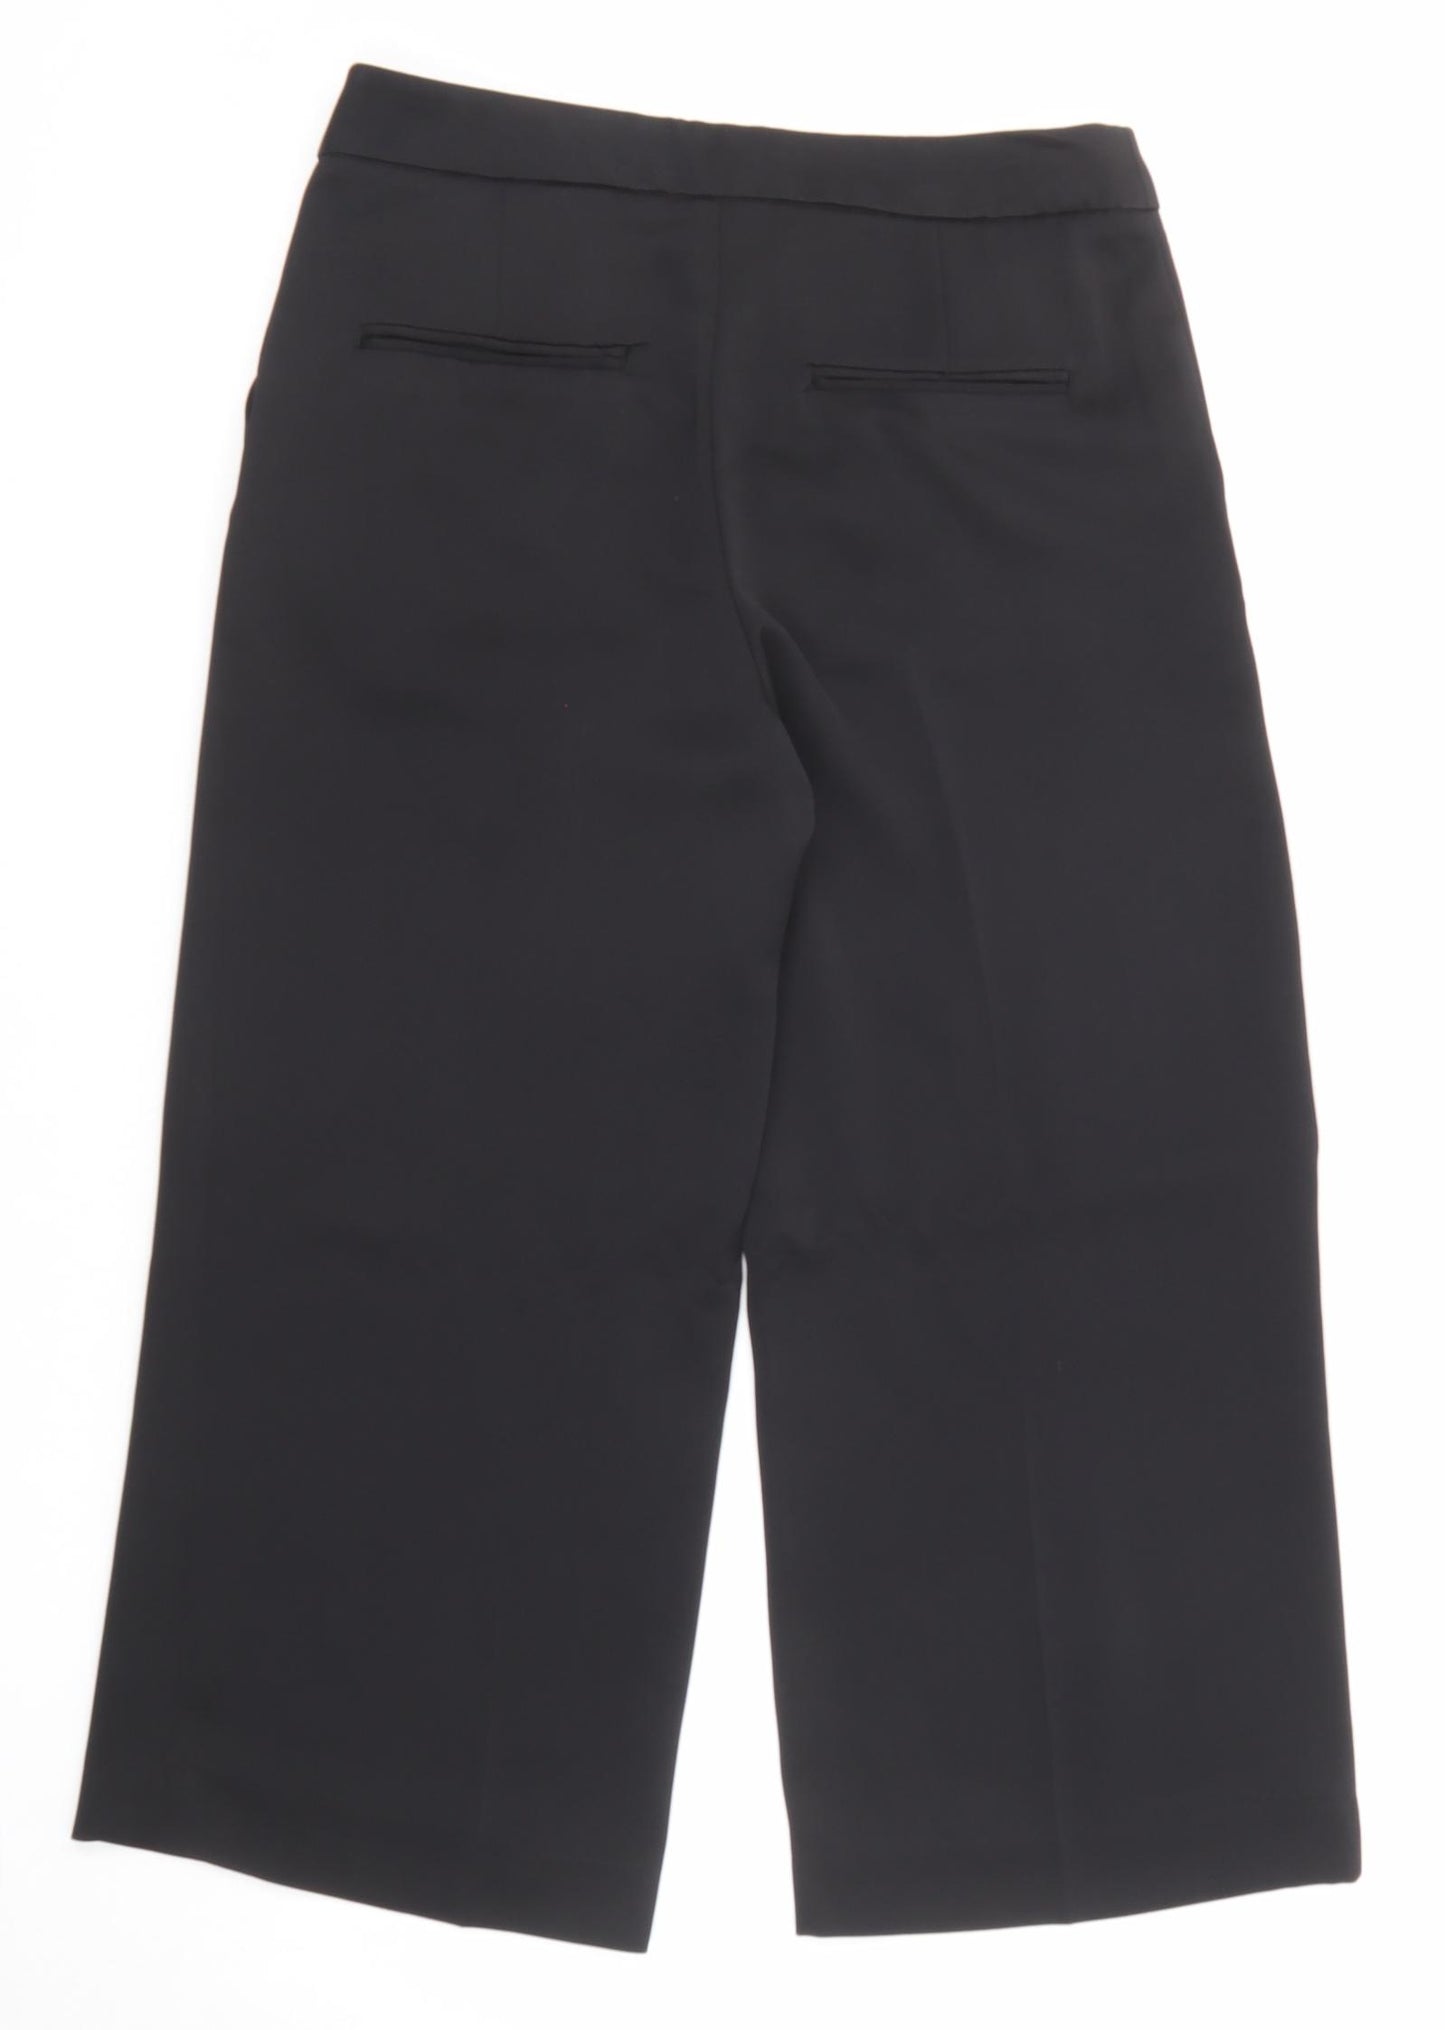 H&M Womens Black Polyester Trousers Size 8 Regular Zip